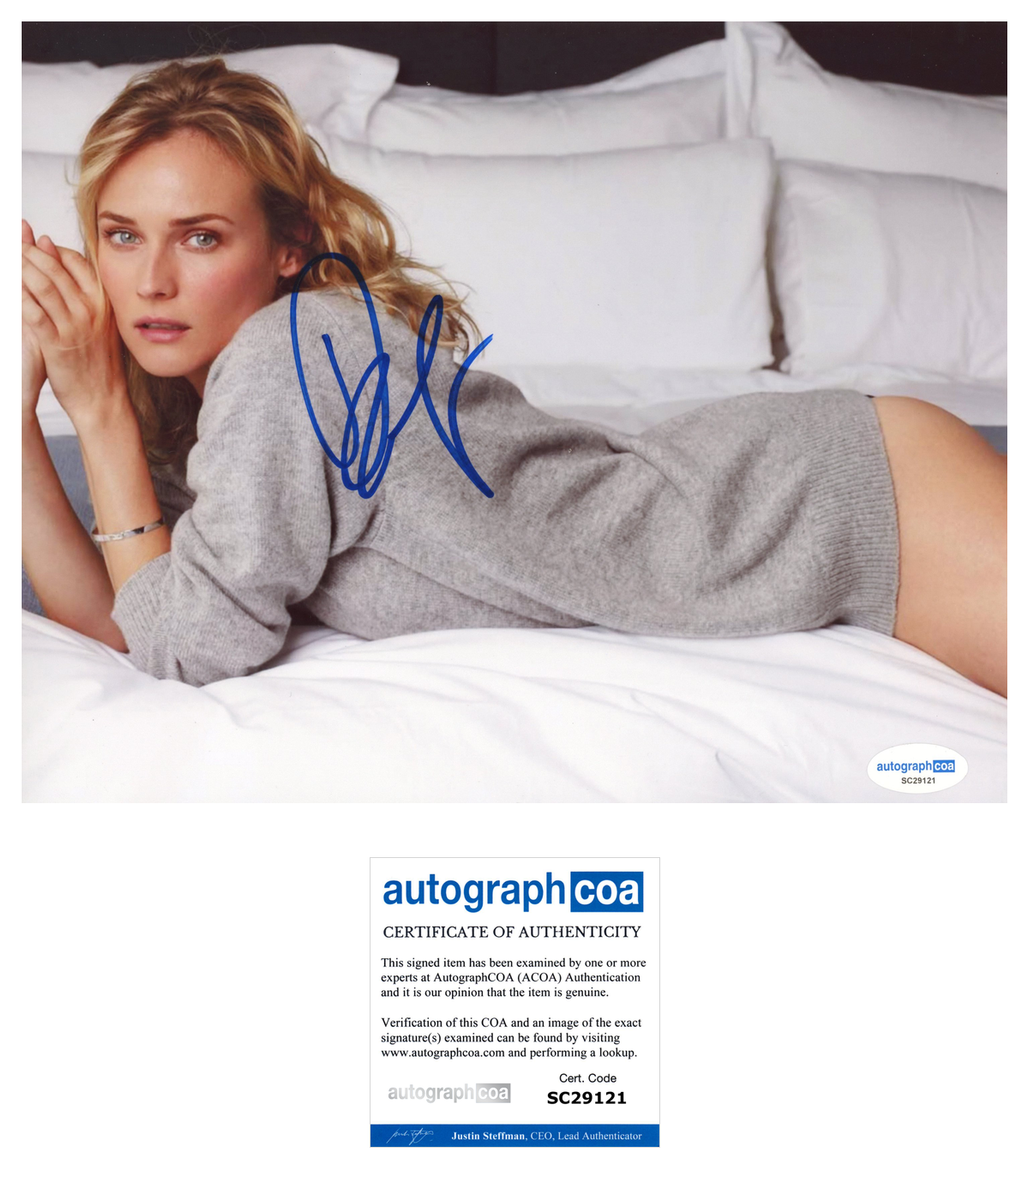 Diane Kruger in-person autographed photo Great color ph